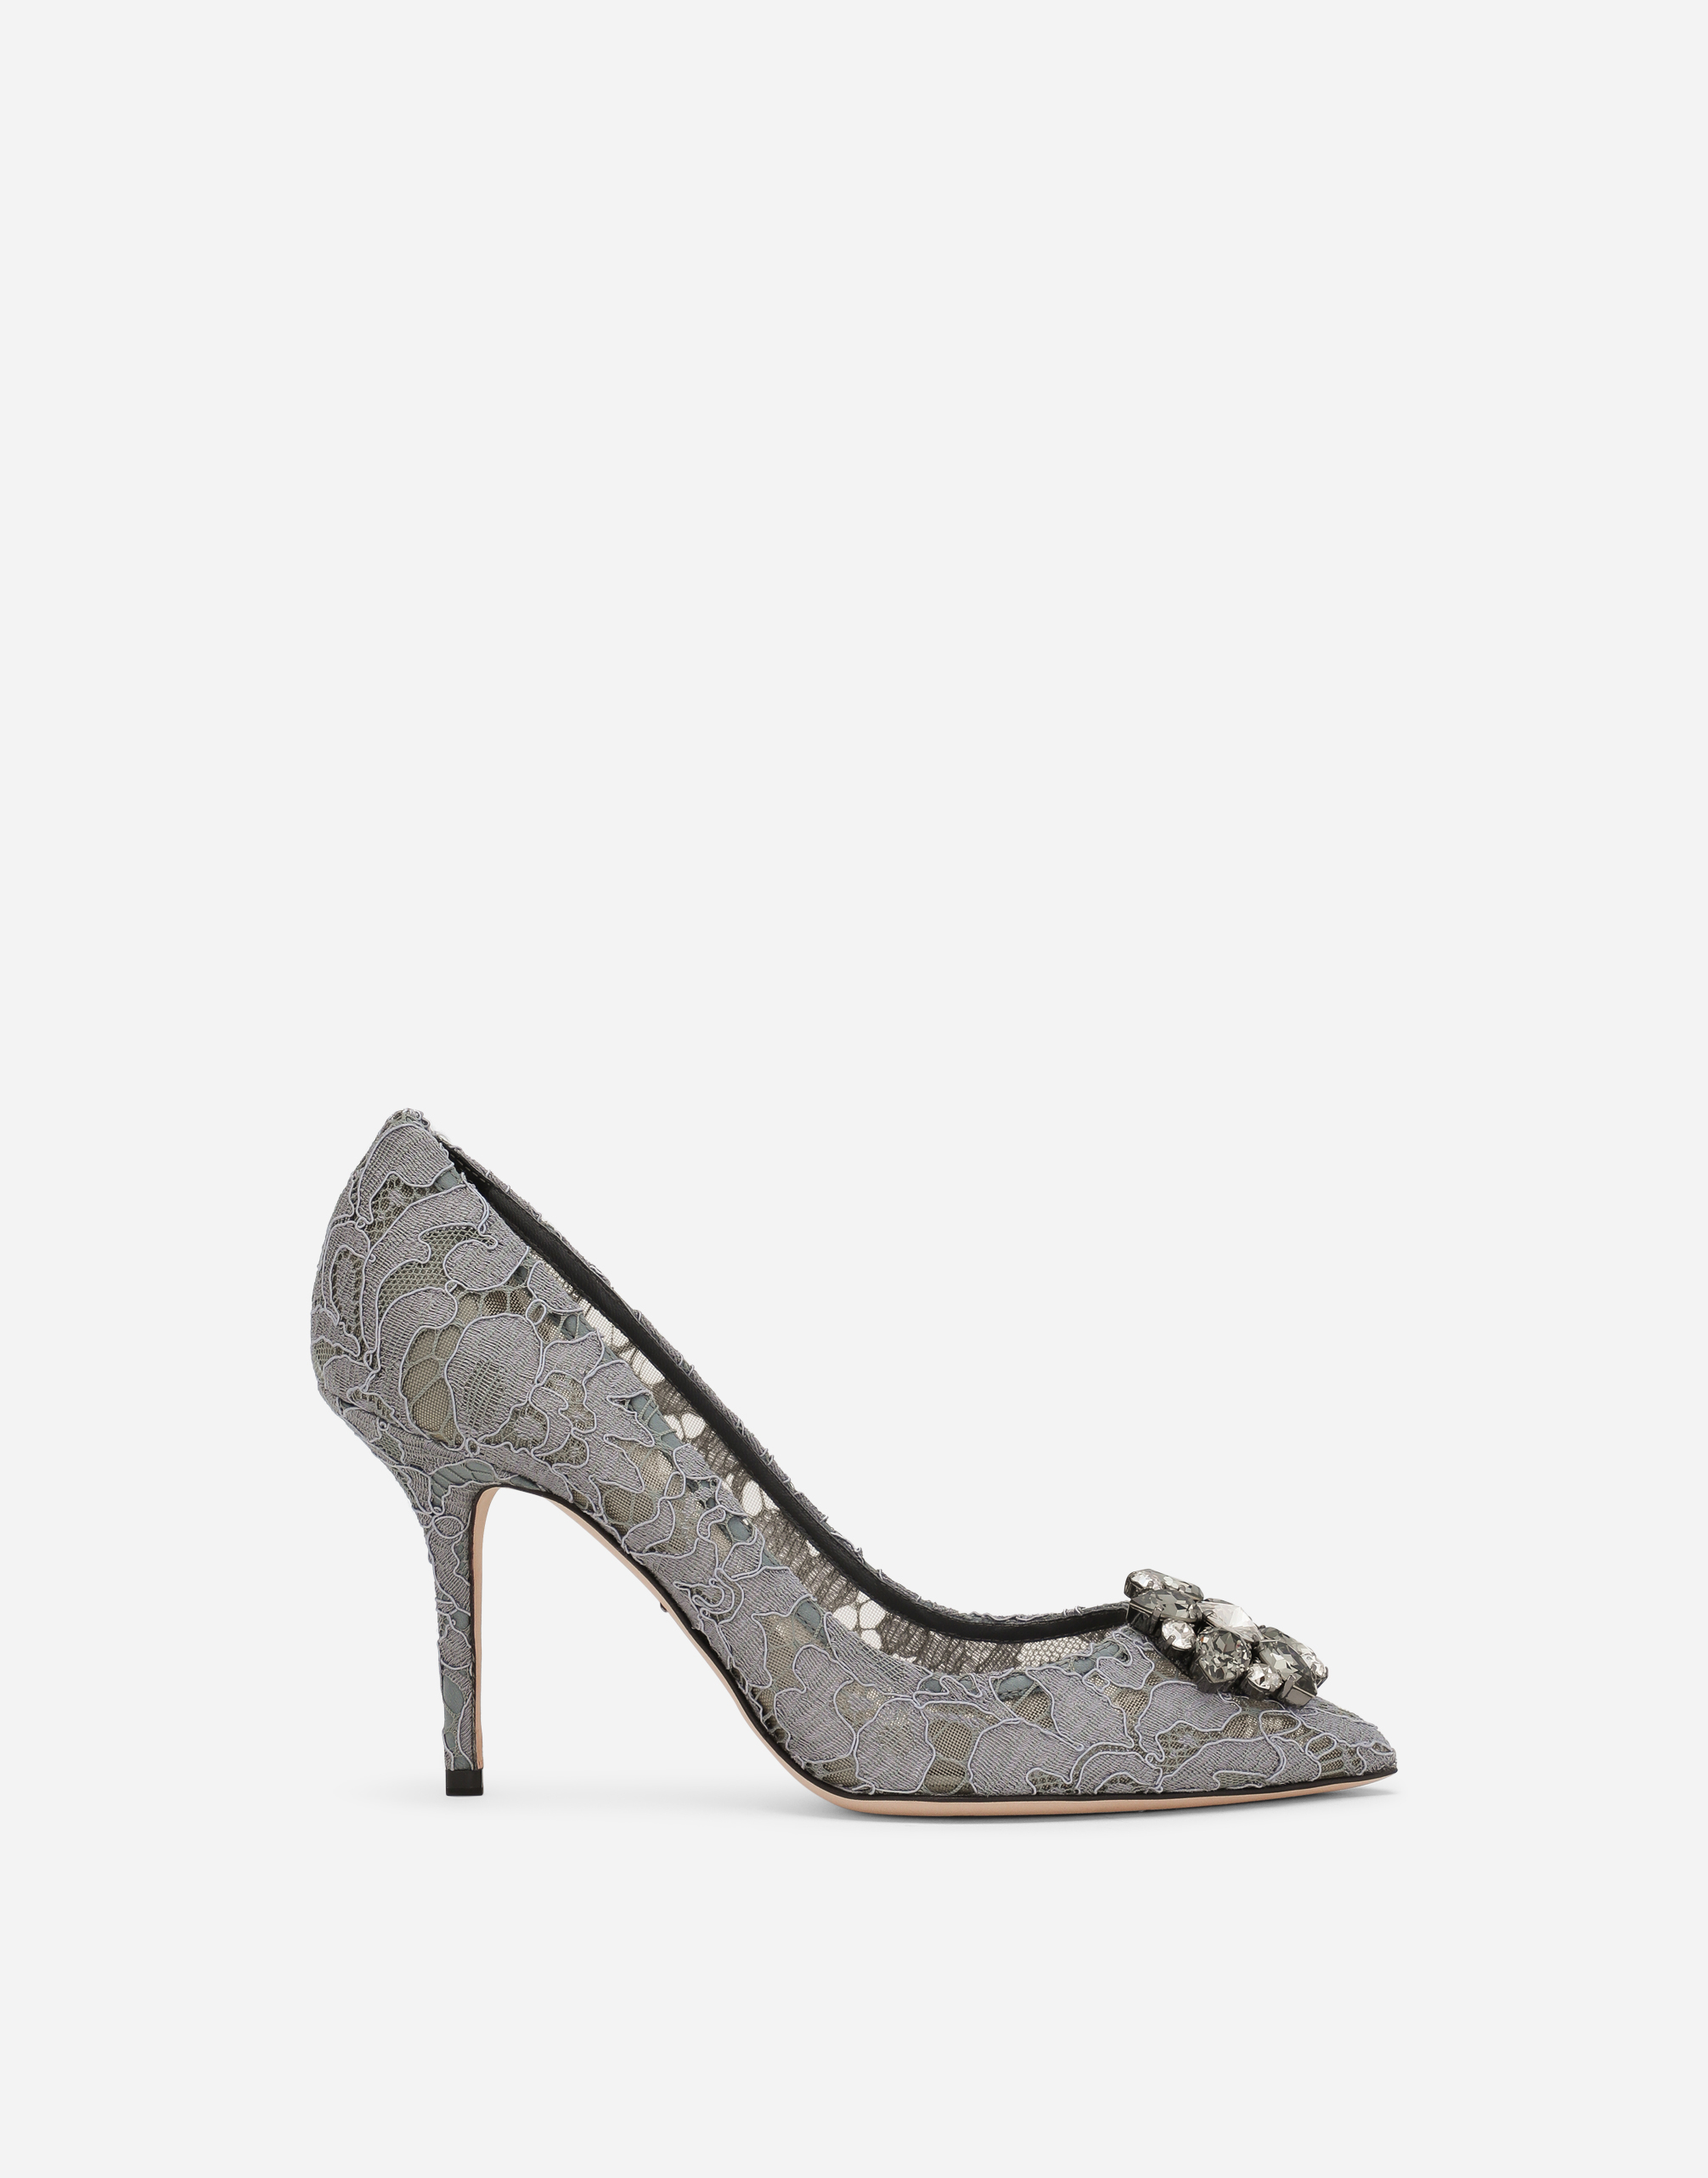 Lace rainbow pumps with brooch detailing in Grey